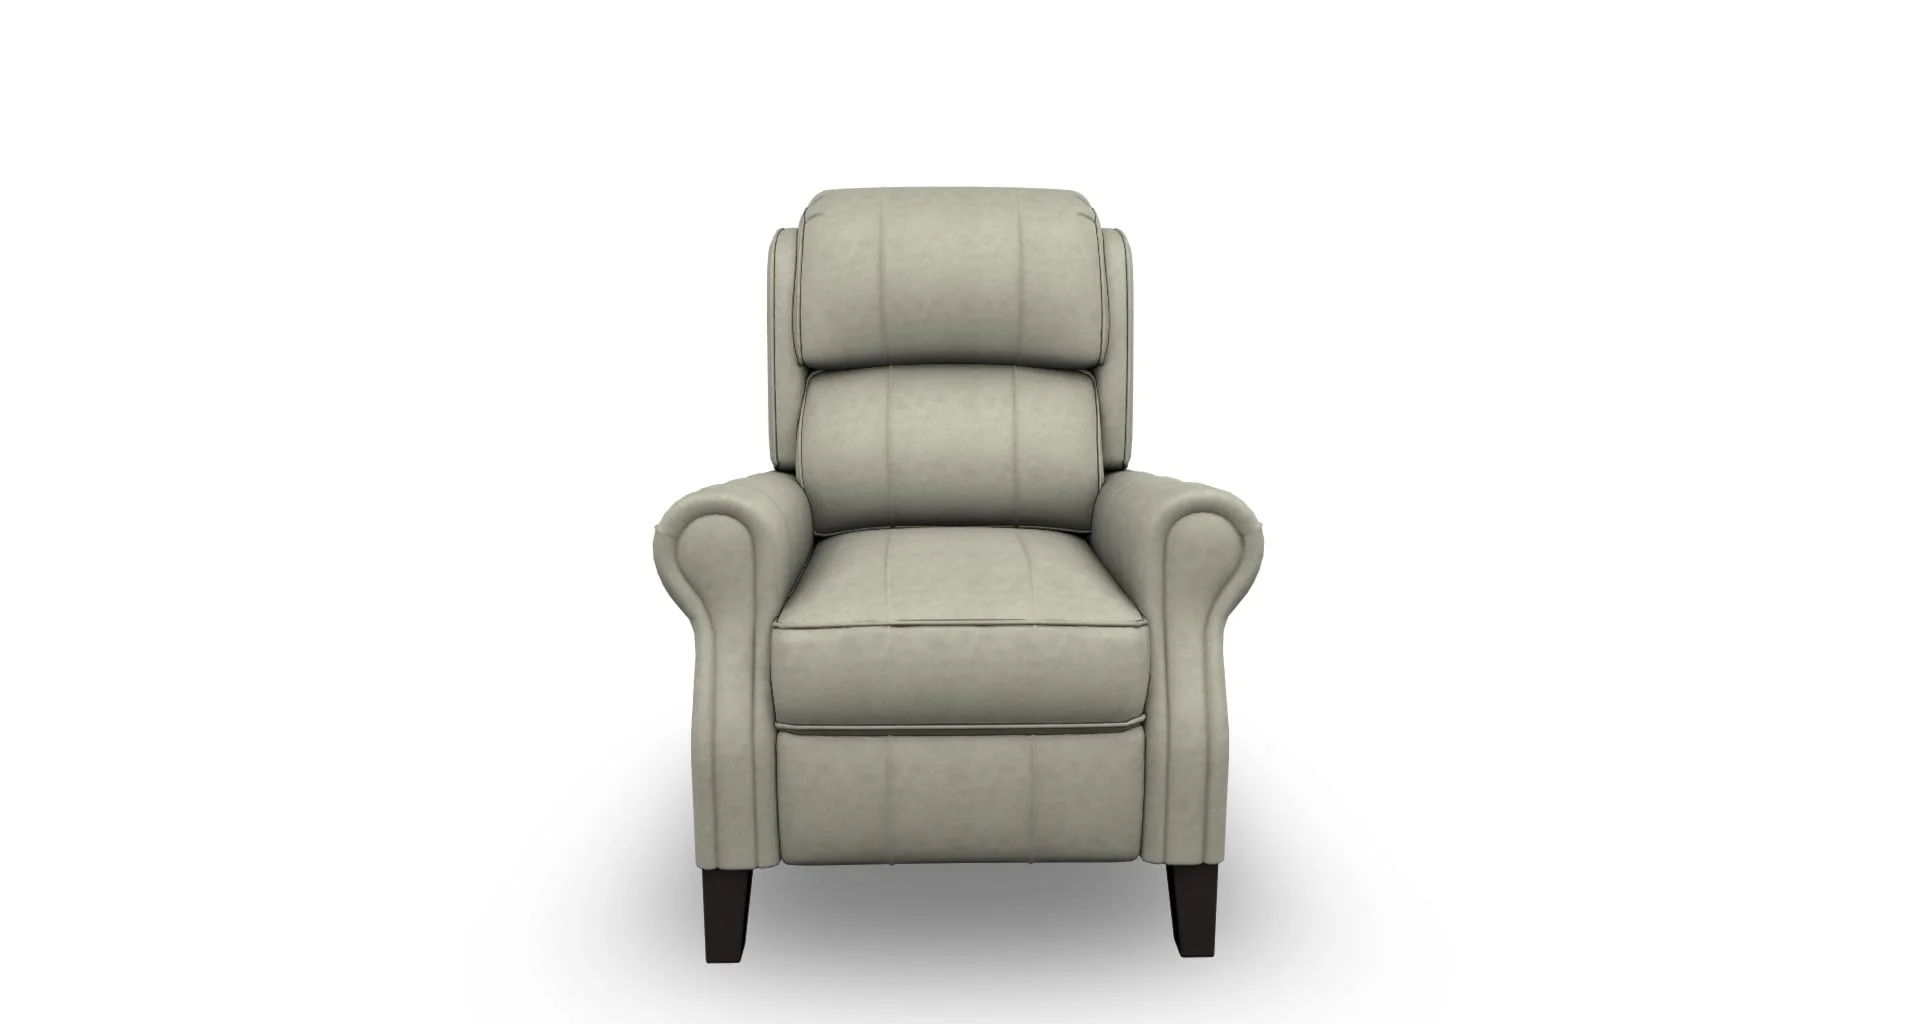 Bravo Furniture Joanna Joanna Push Back Recliner With Rolled Arms